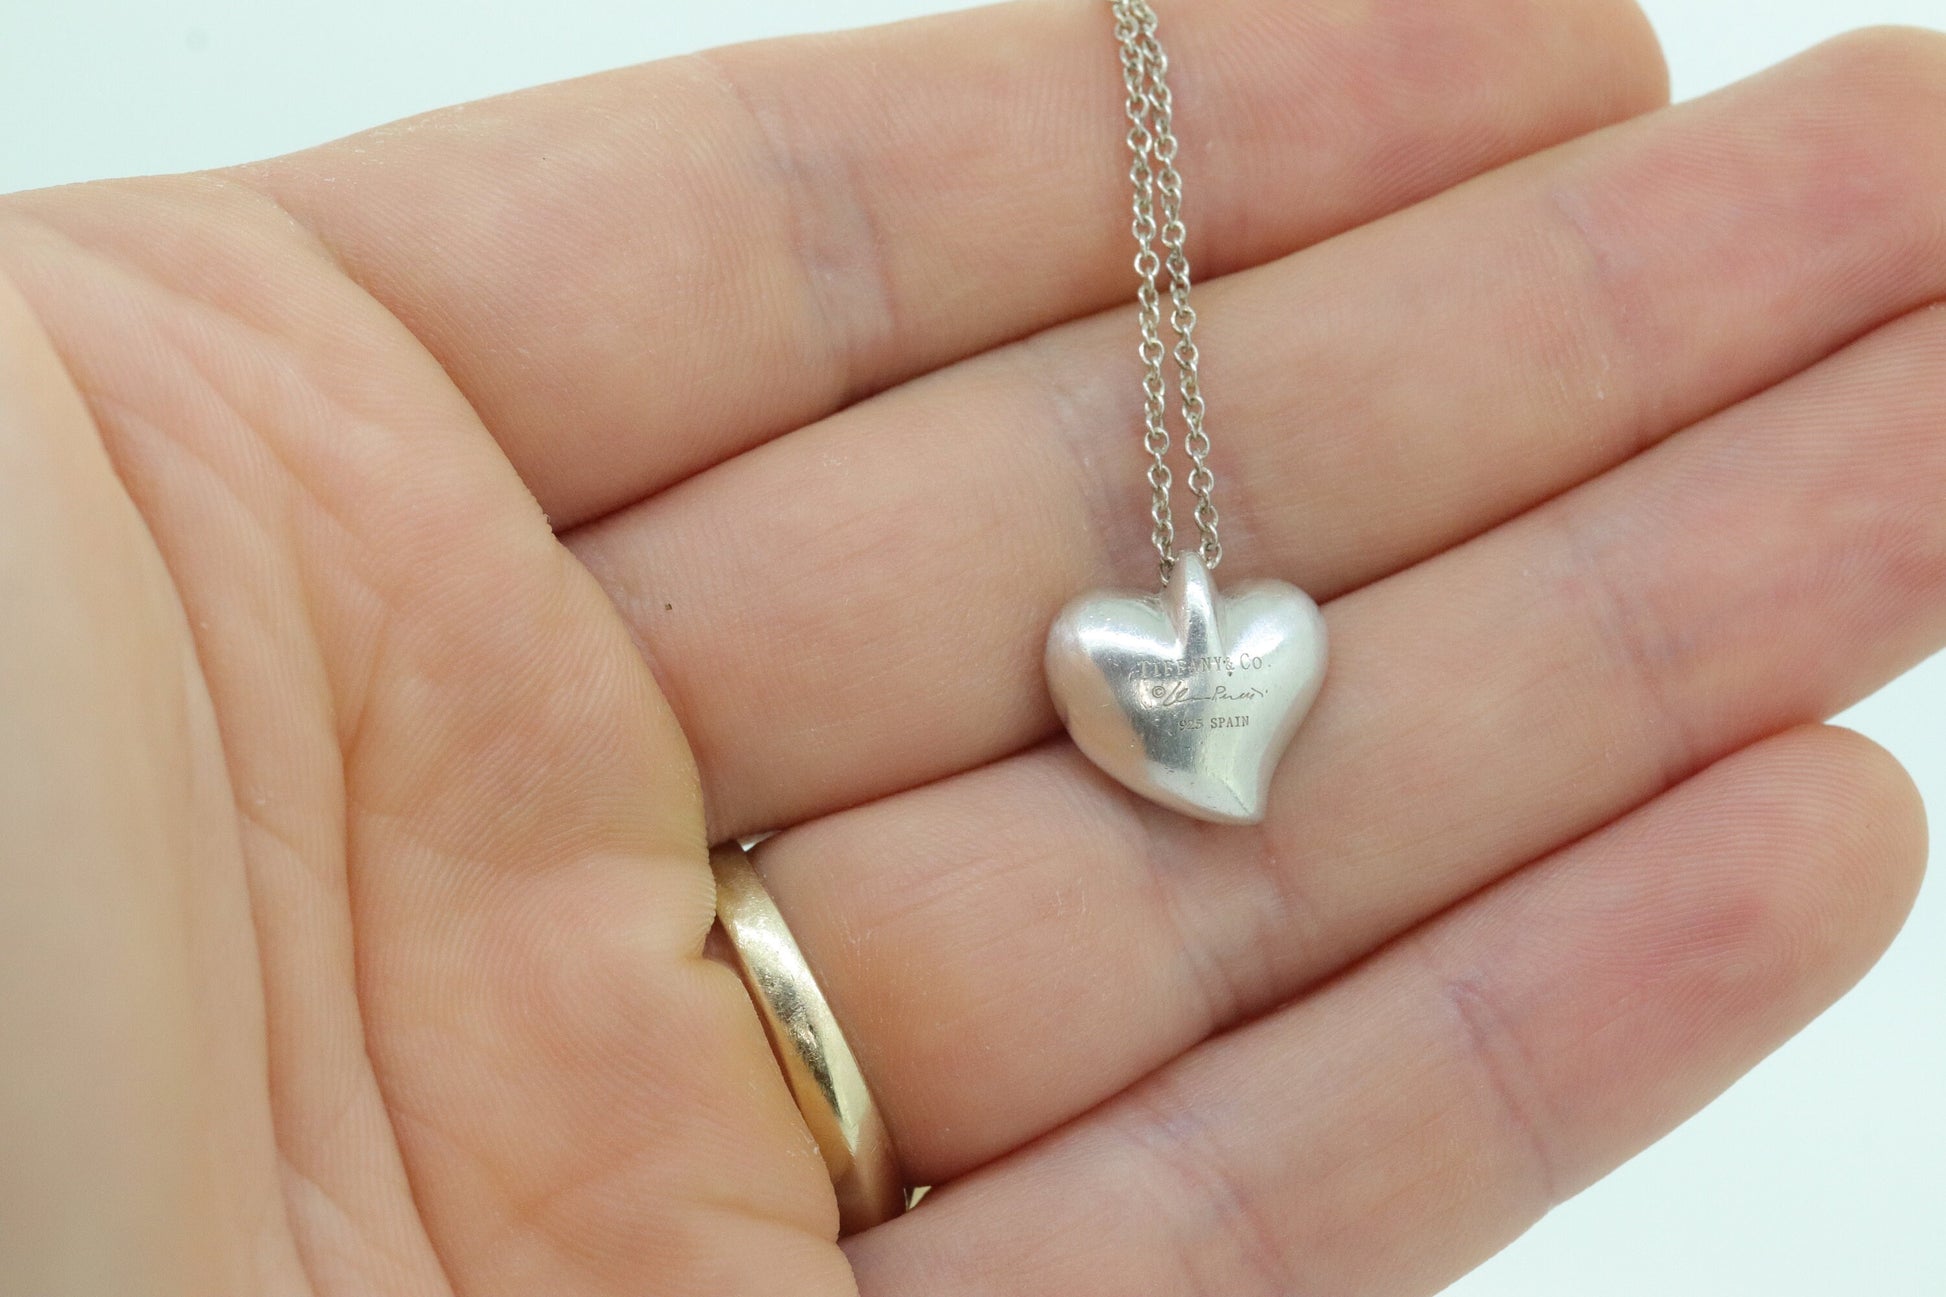 Vintage Tiffany and Co Necklace Heart Pendant. Elsa Peretti sterling silver puffed heart necklace. st(86)